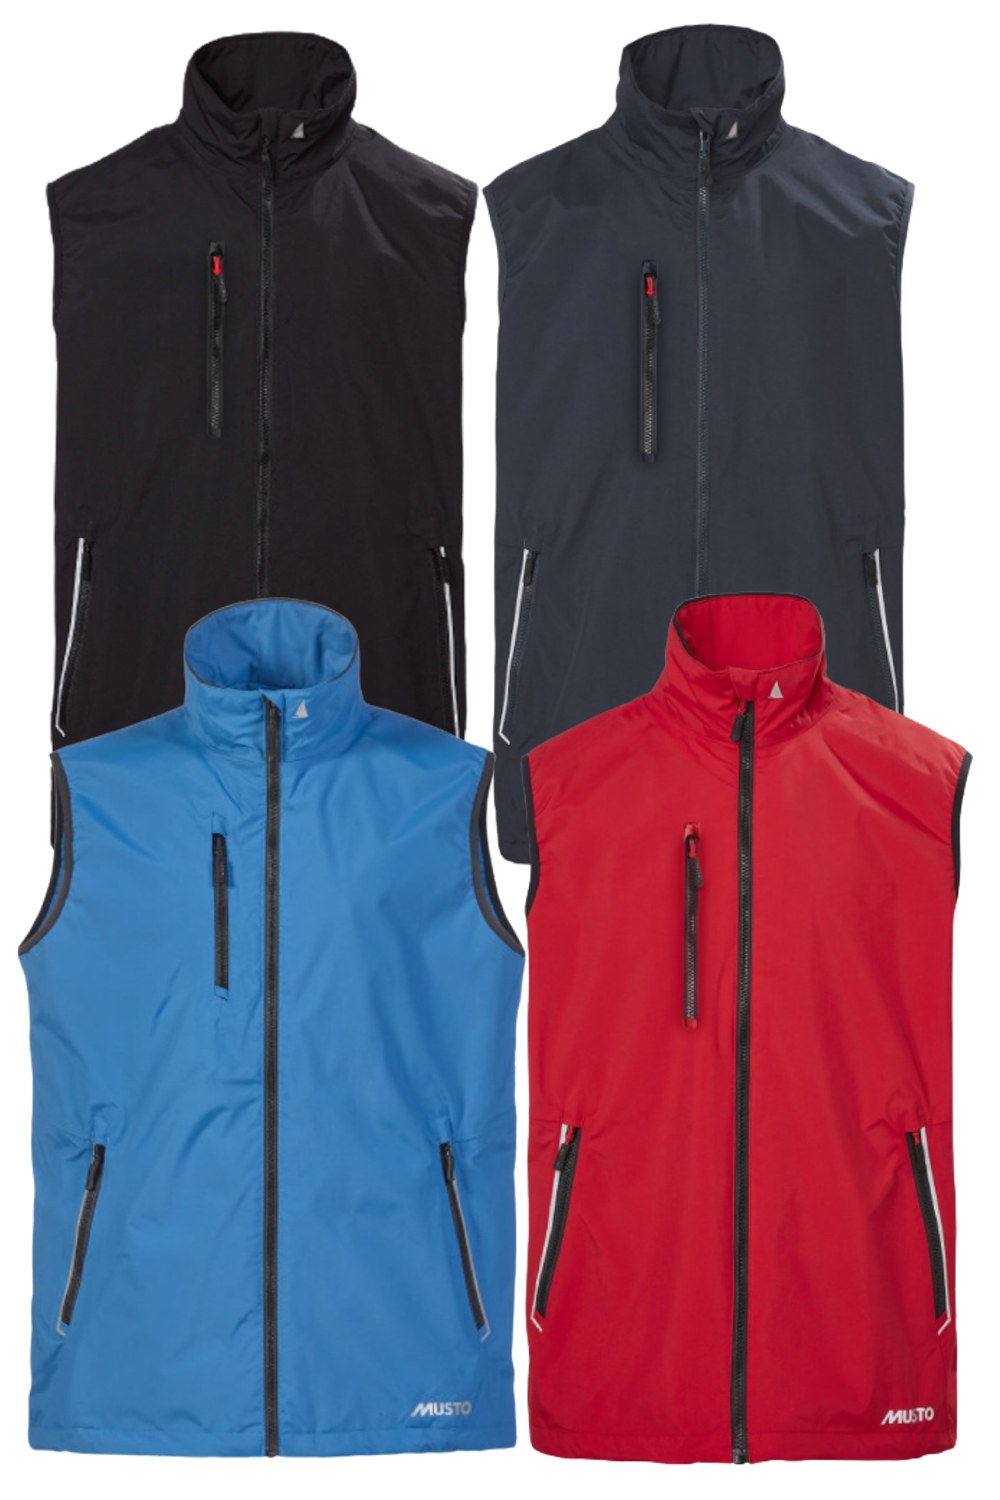 Musto Sardinia Gilet 2.0 in Black, Navy Blue, Blue Beat and True Red 